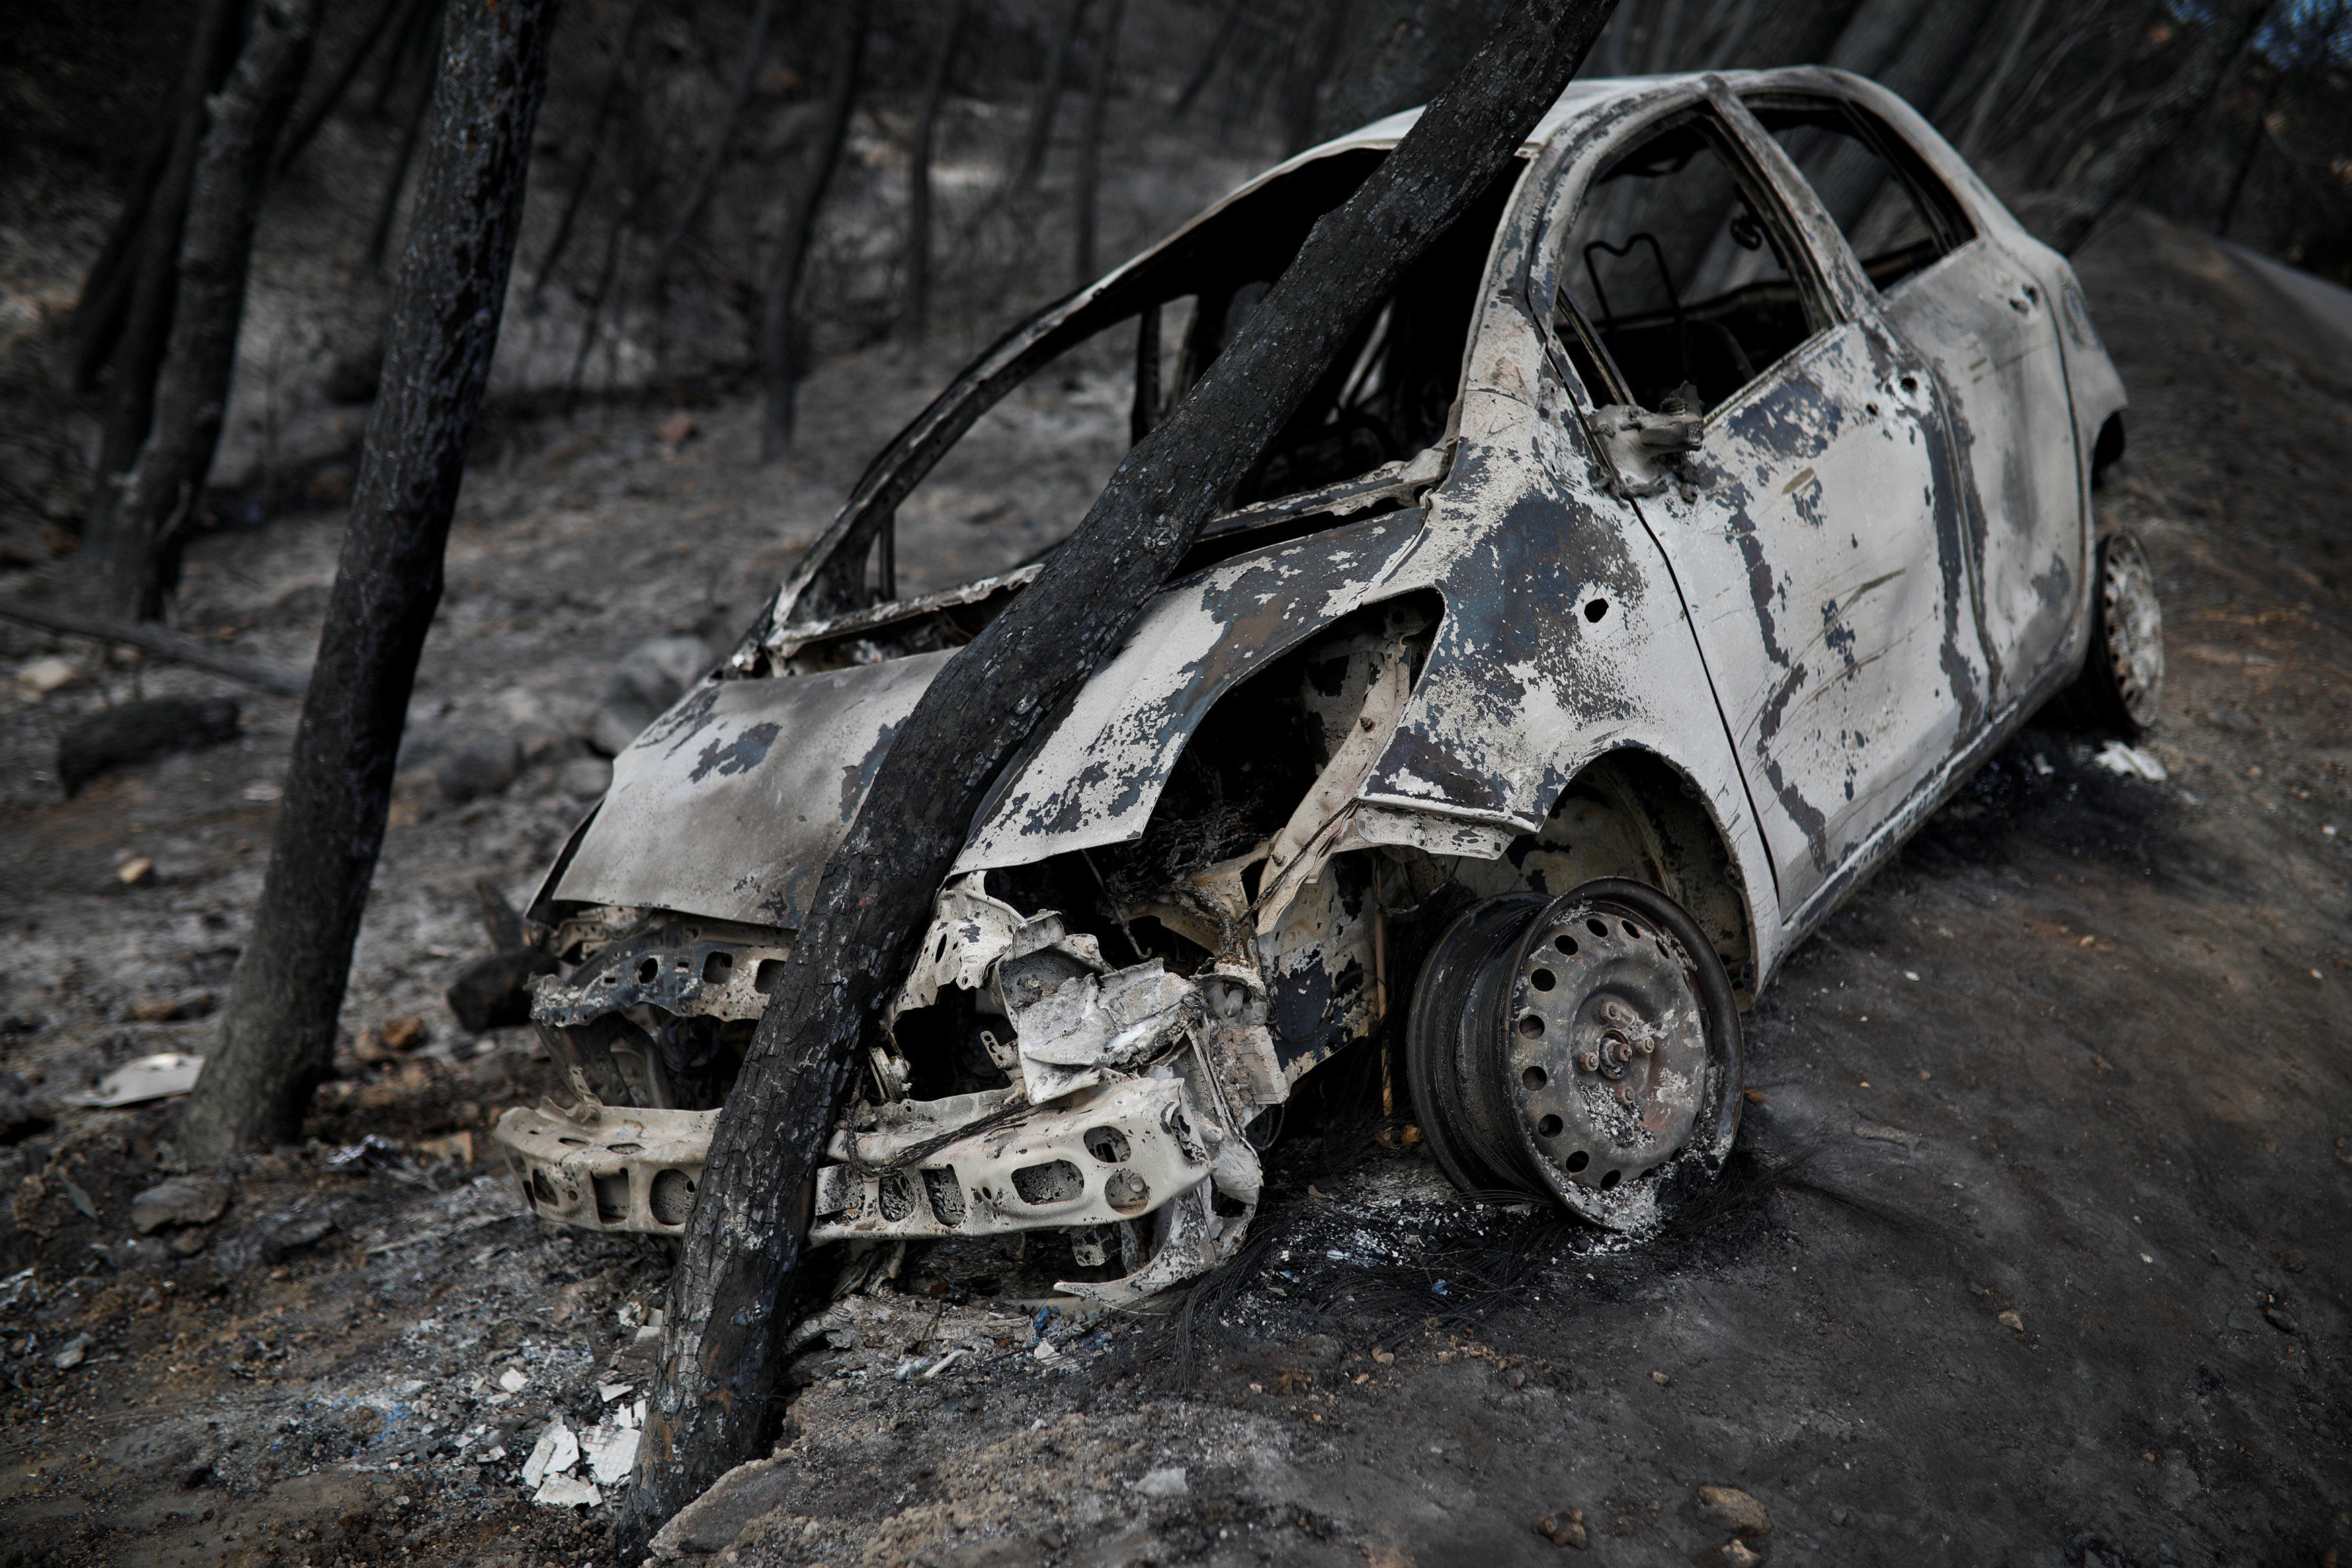 Fire in Greece Officials see "serious indications" arson led to forest